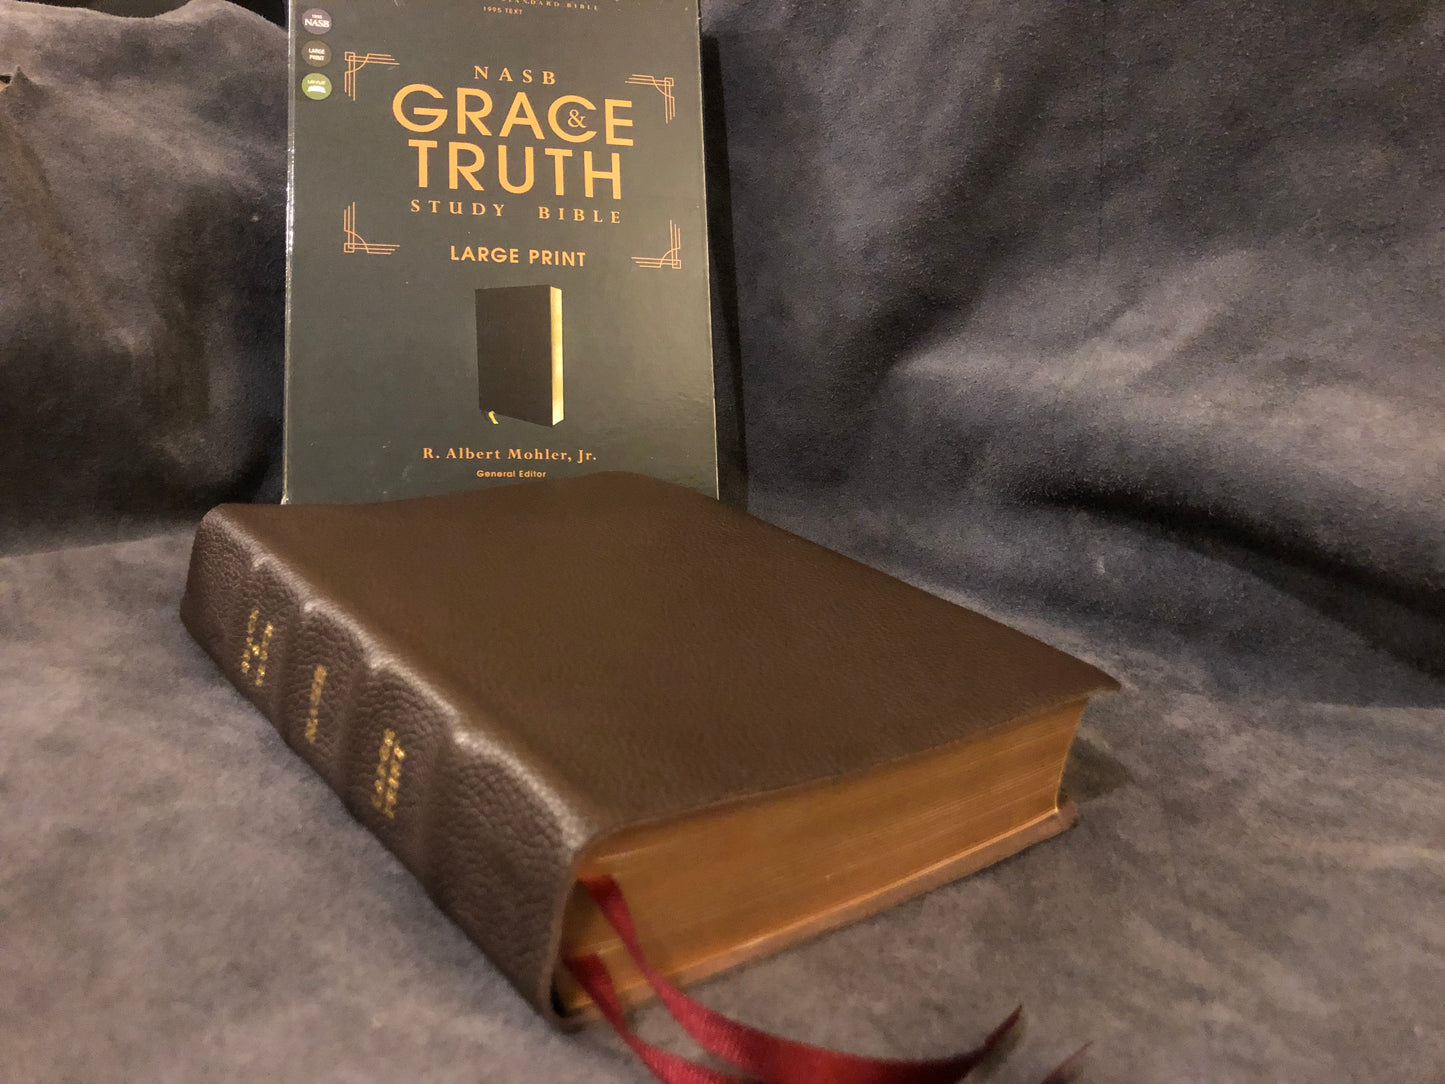 NASB LARGE PRINT GRACE and TRUTH study Bible